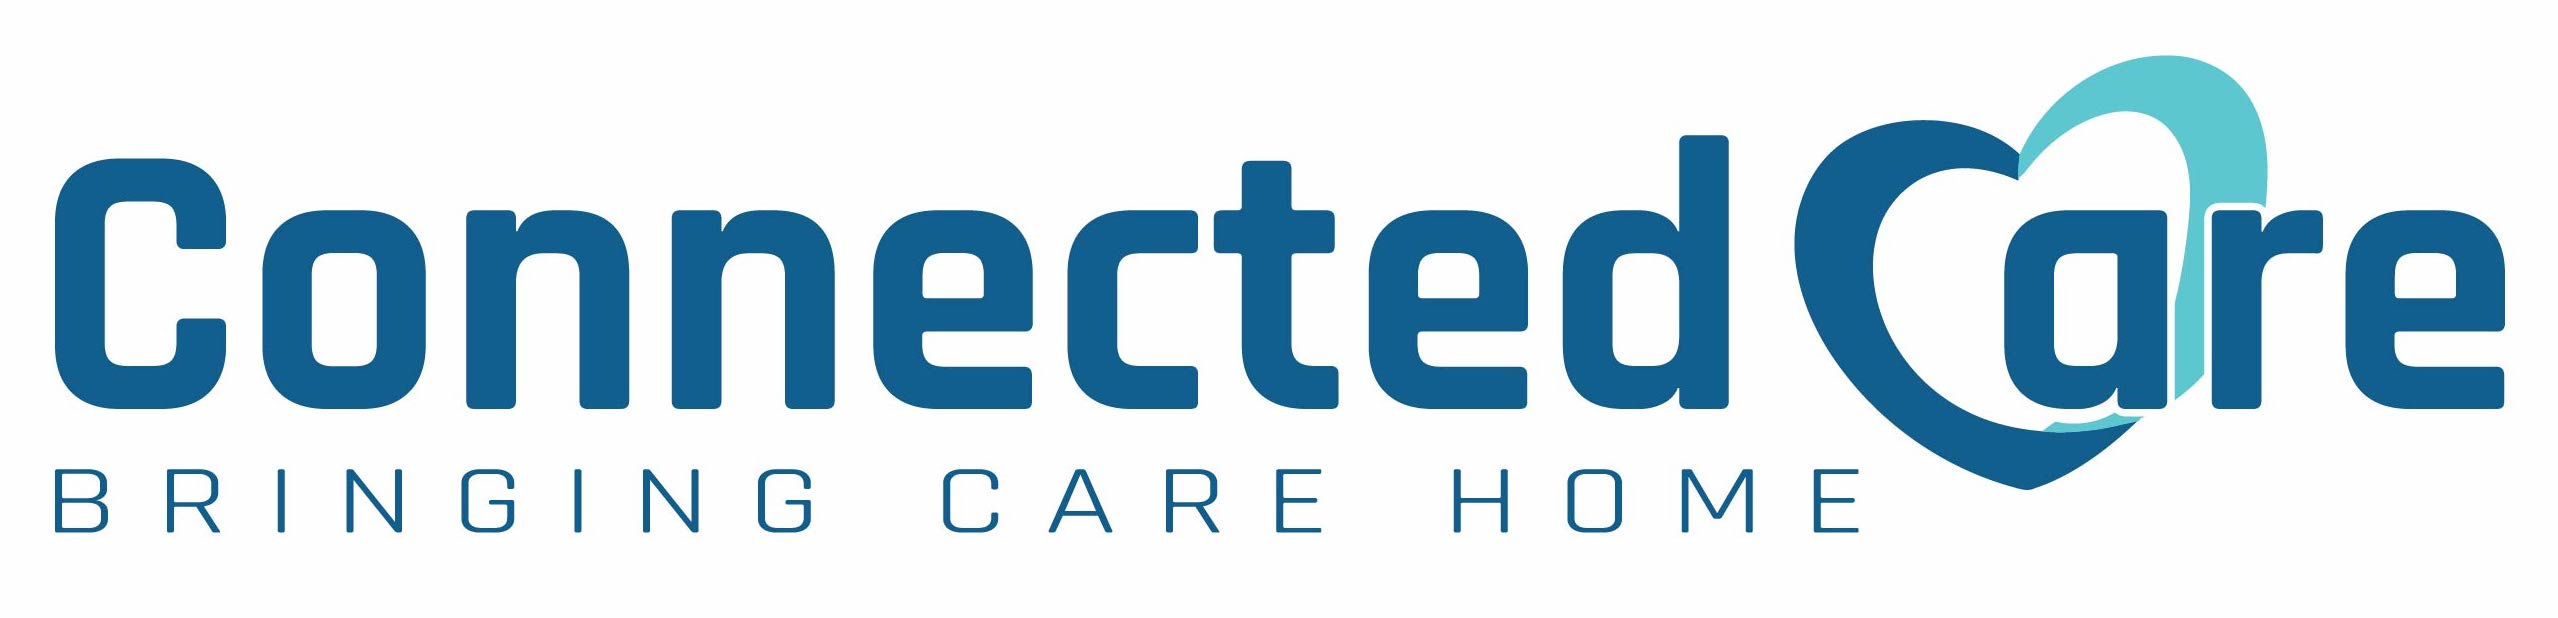 Connected Care NY